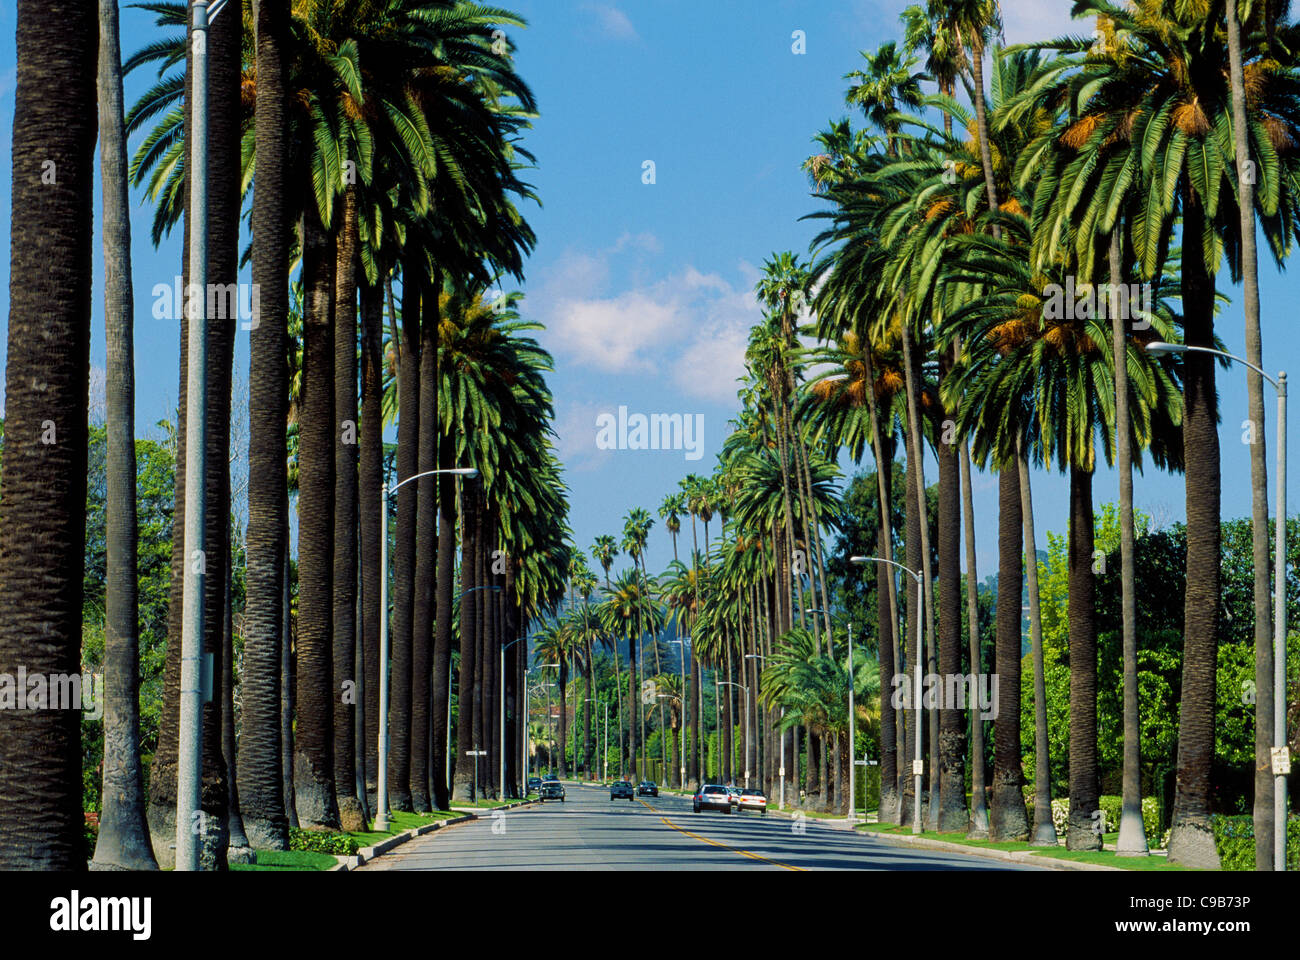 Towering palm trees line an upscale residential street in Beverly Hills, a famous community in Los Angeles County in Southern California, USA. Stock Photo